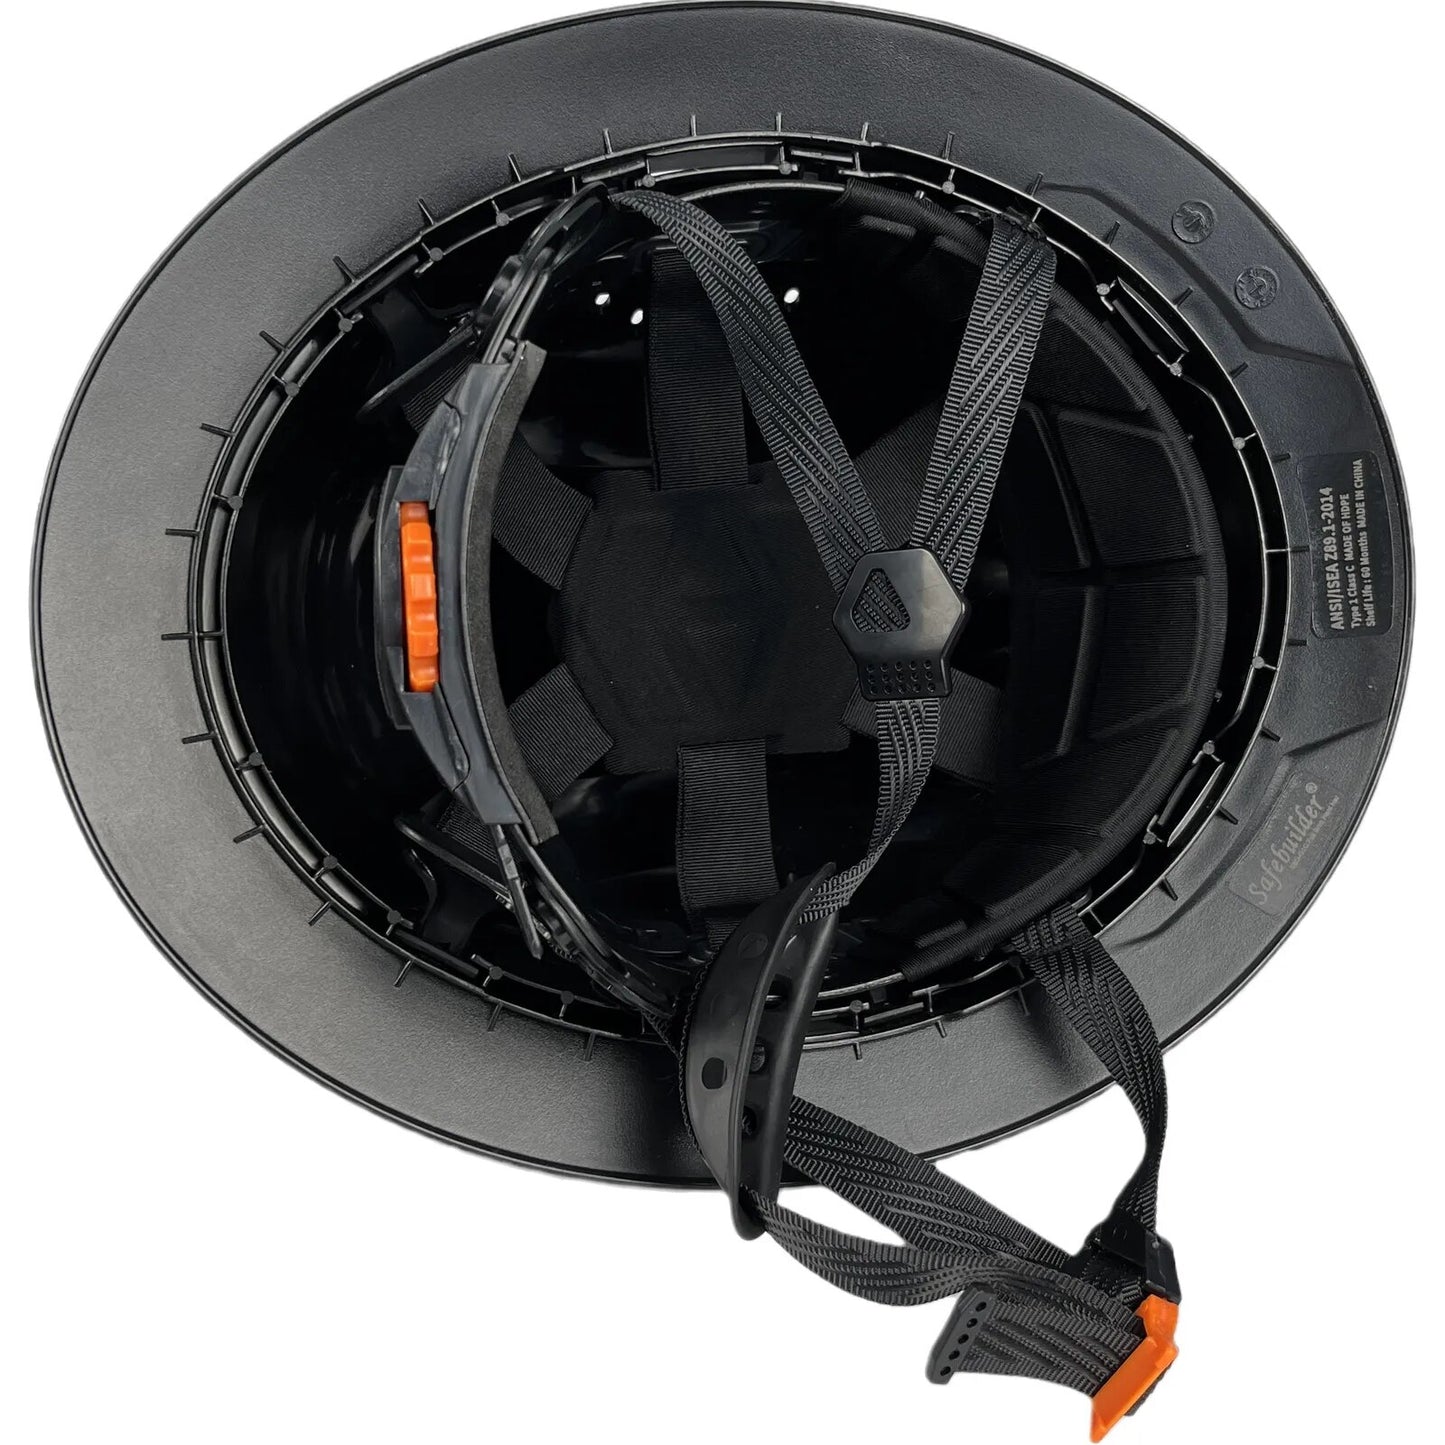 ANSI Approved HDPE Safety Helmet with 6 Point Adjustable